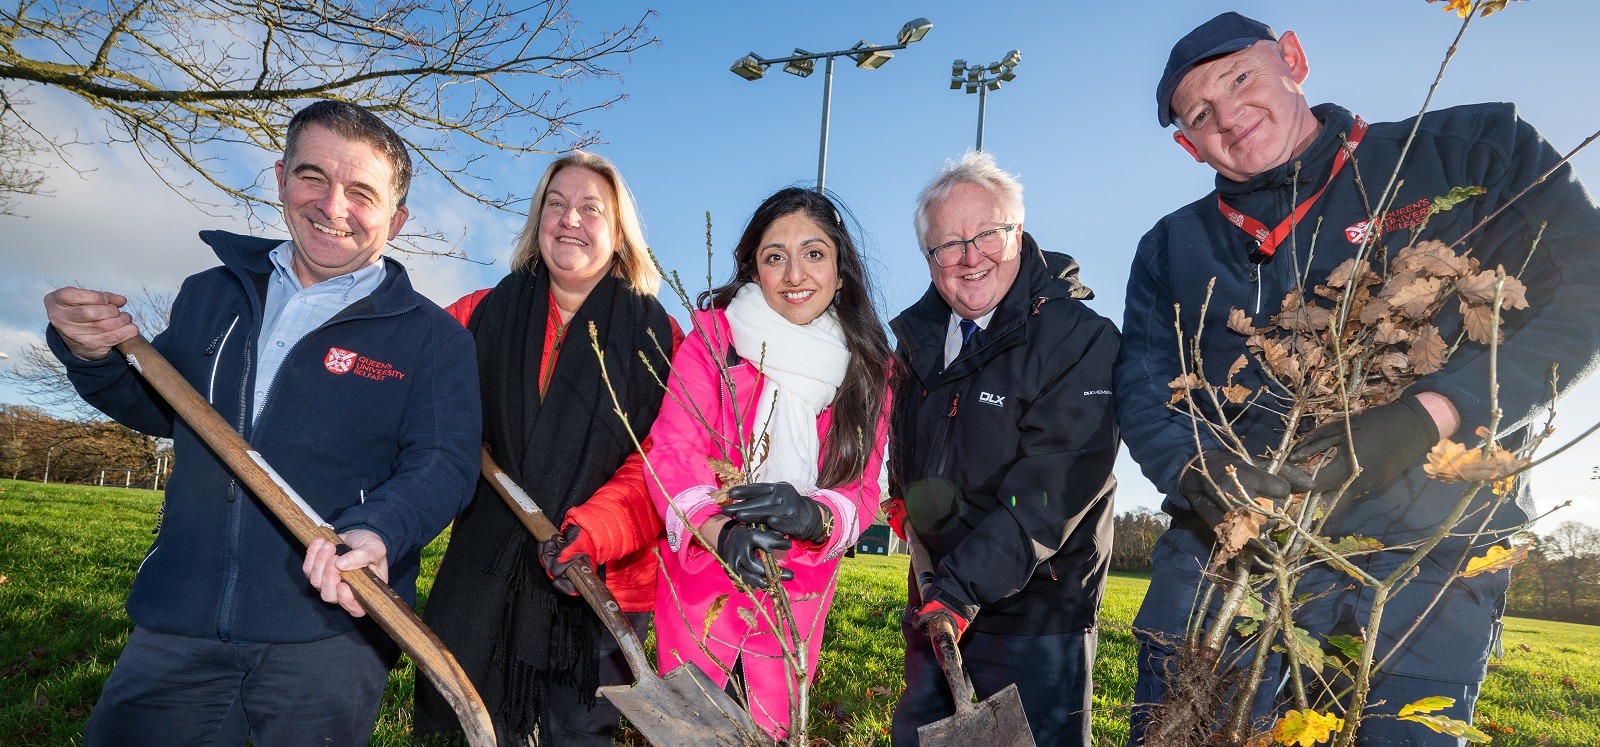 Planting trees at Malone Playing Fields, November 2023, Left to right: Head Gardener Paul Wallace; Staff Forum representative for the Global Marketing, Recruitment and Admissions Directorate Marelle Crawford; Staff Forum representative for the Development and Alumni Relations Directorate Natasha Sharma; Associate Pro-Vice-Chancellor Professor Michael Alcorn; Leadhand Gardener William Kirkwood